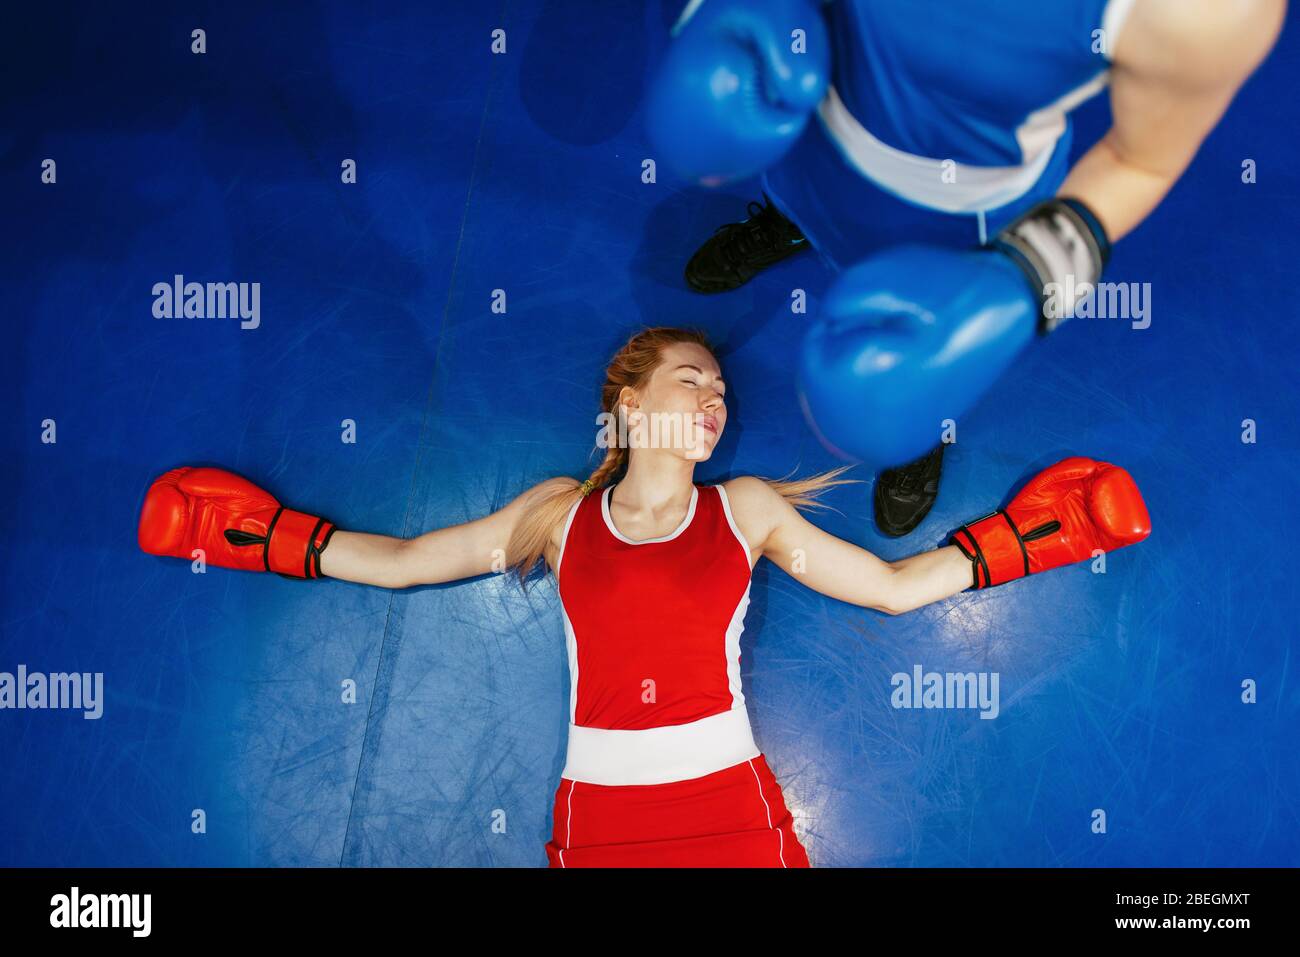 Women boxing, girl in red is knocked out Stock Photo